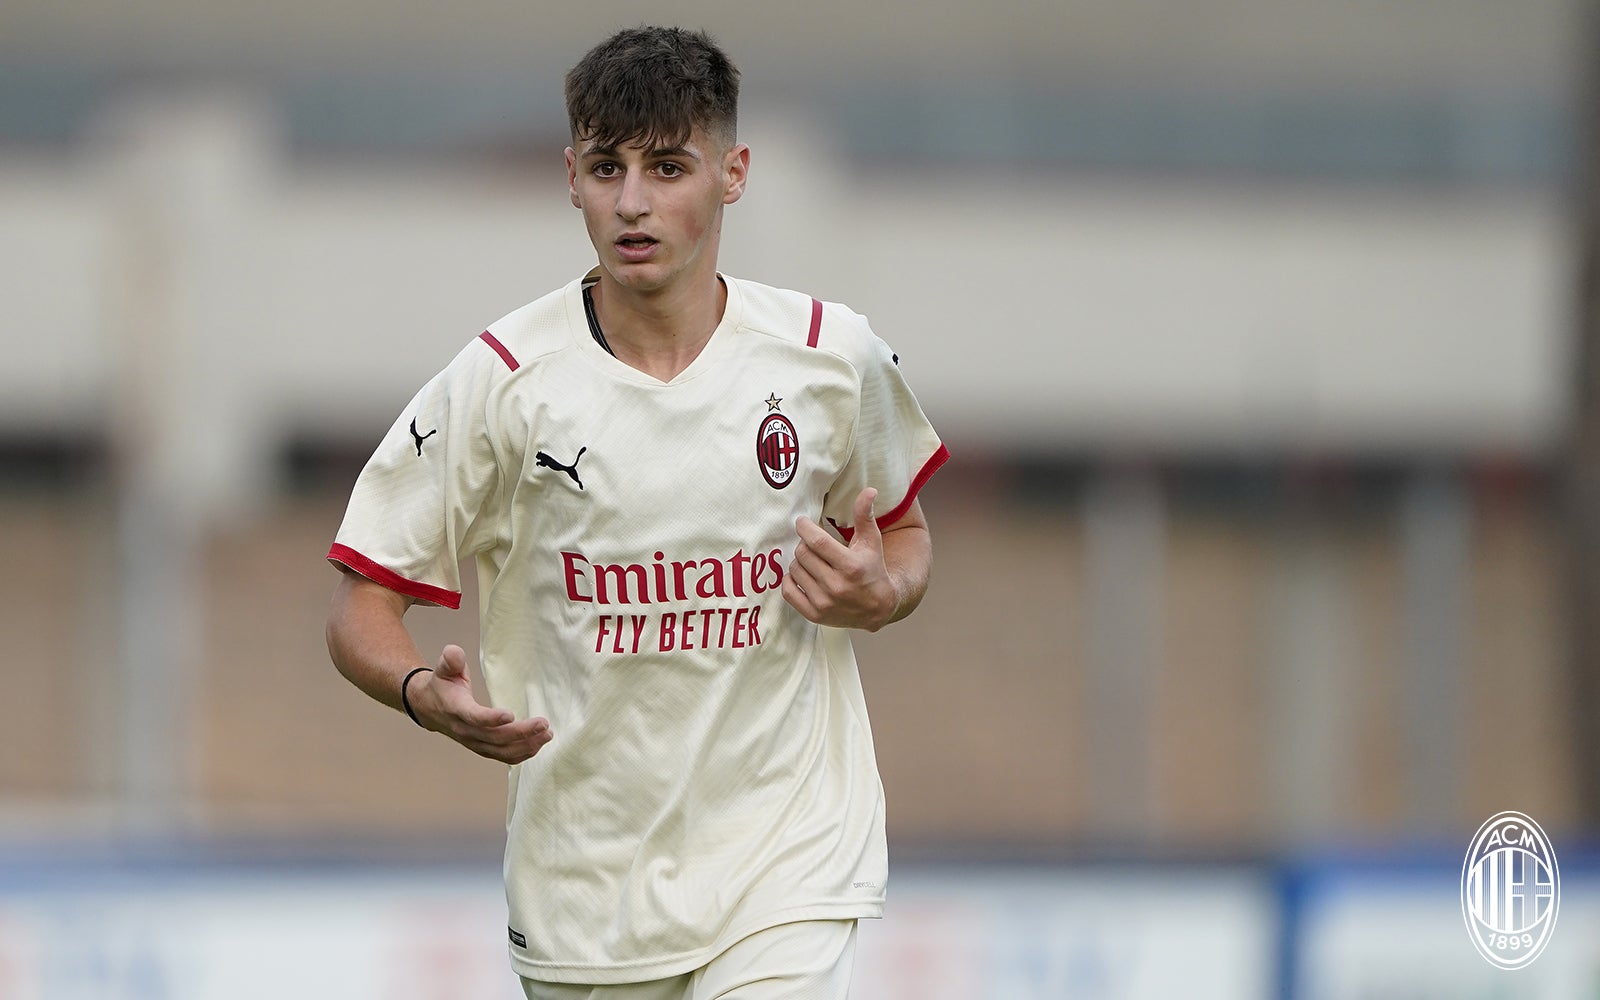 AC Milan U15 Youth Side Wins Their Title Beating Fiorentina 1-0 In The  Final - The AC Milan Offside